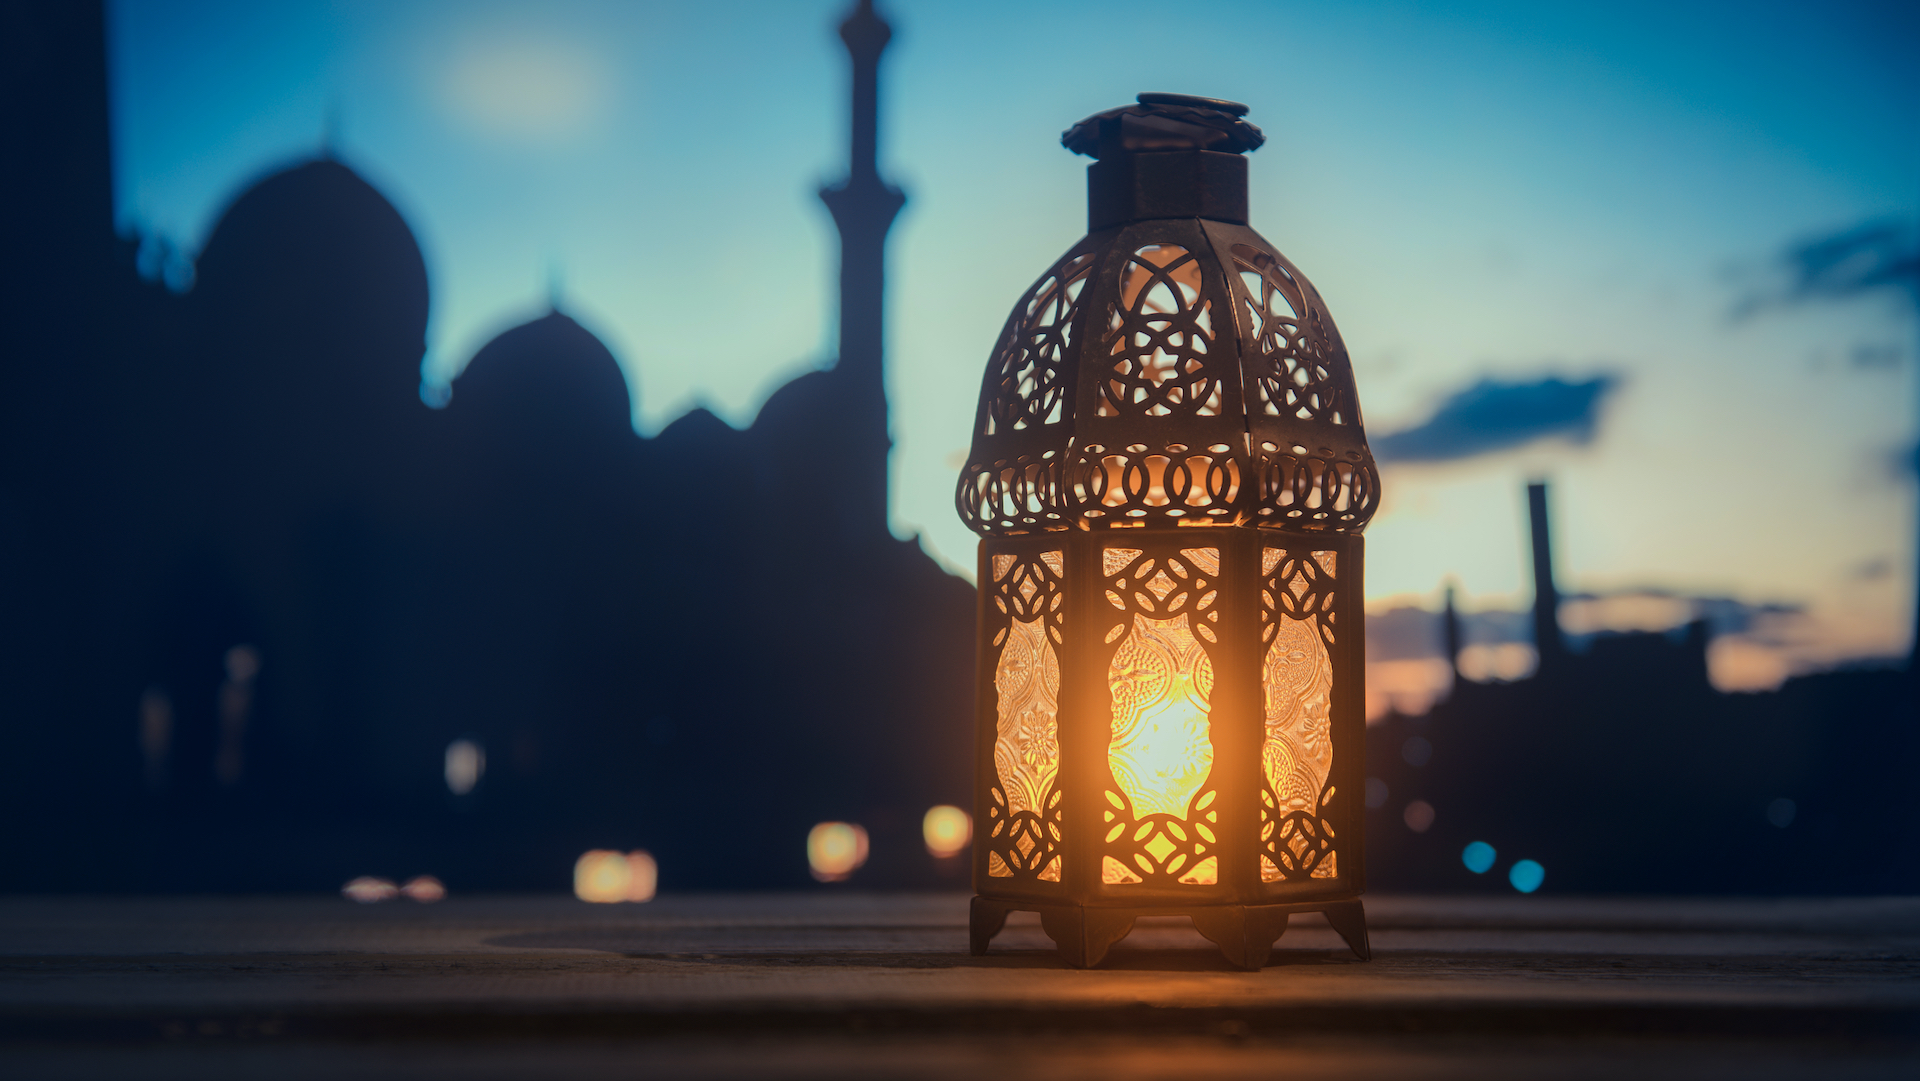 A serene mosque background with glowing lantern